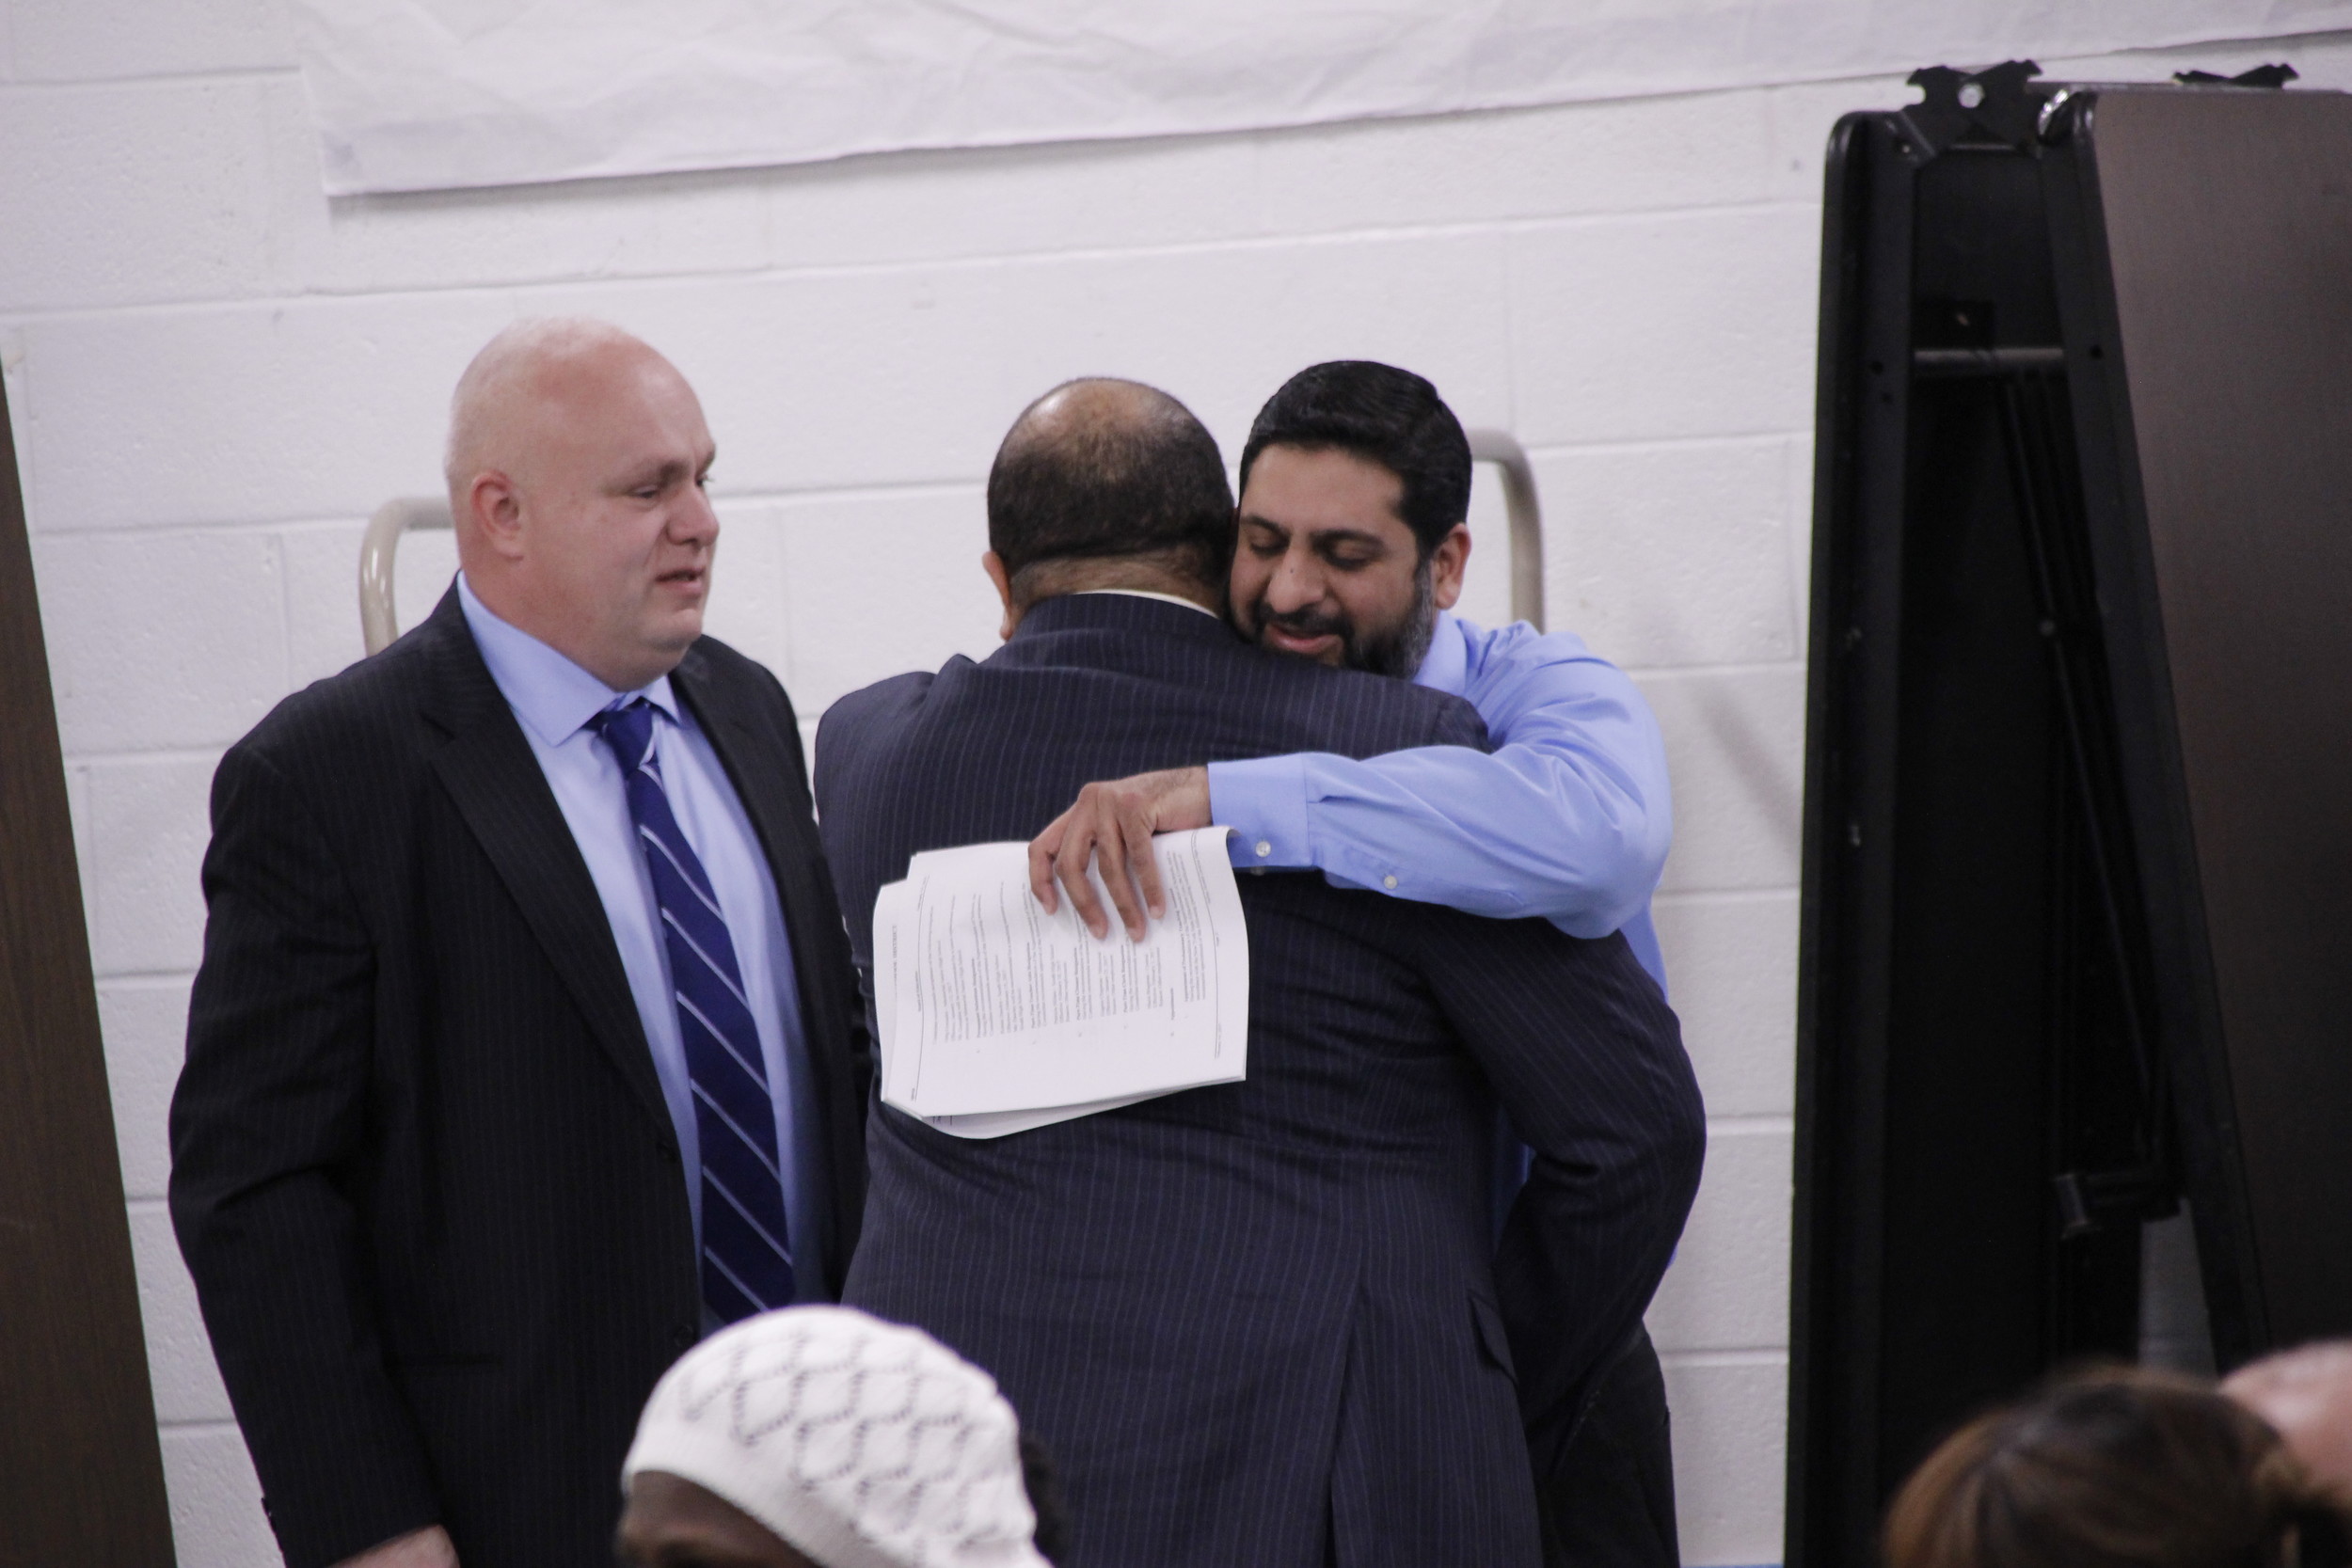 Karim Mozawalla, right, a trustee of Islamic Center of South Shore, embraced school board President Cristobal Stewart after the vote.